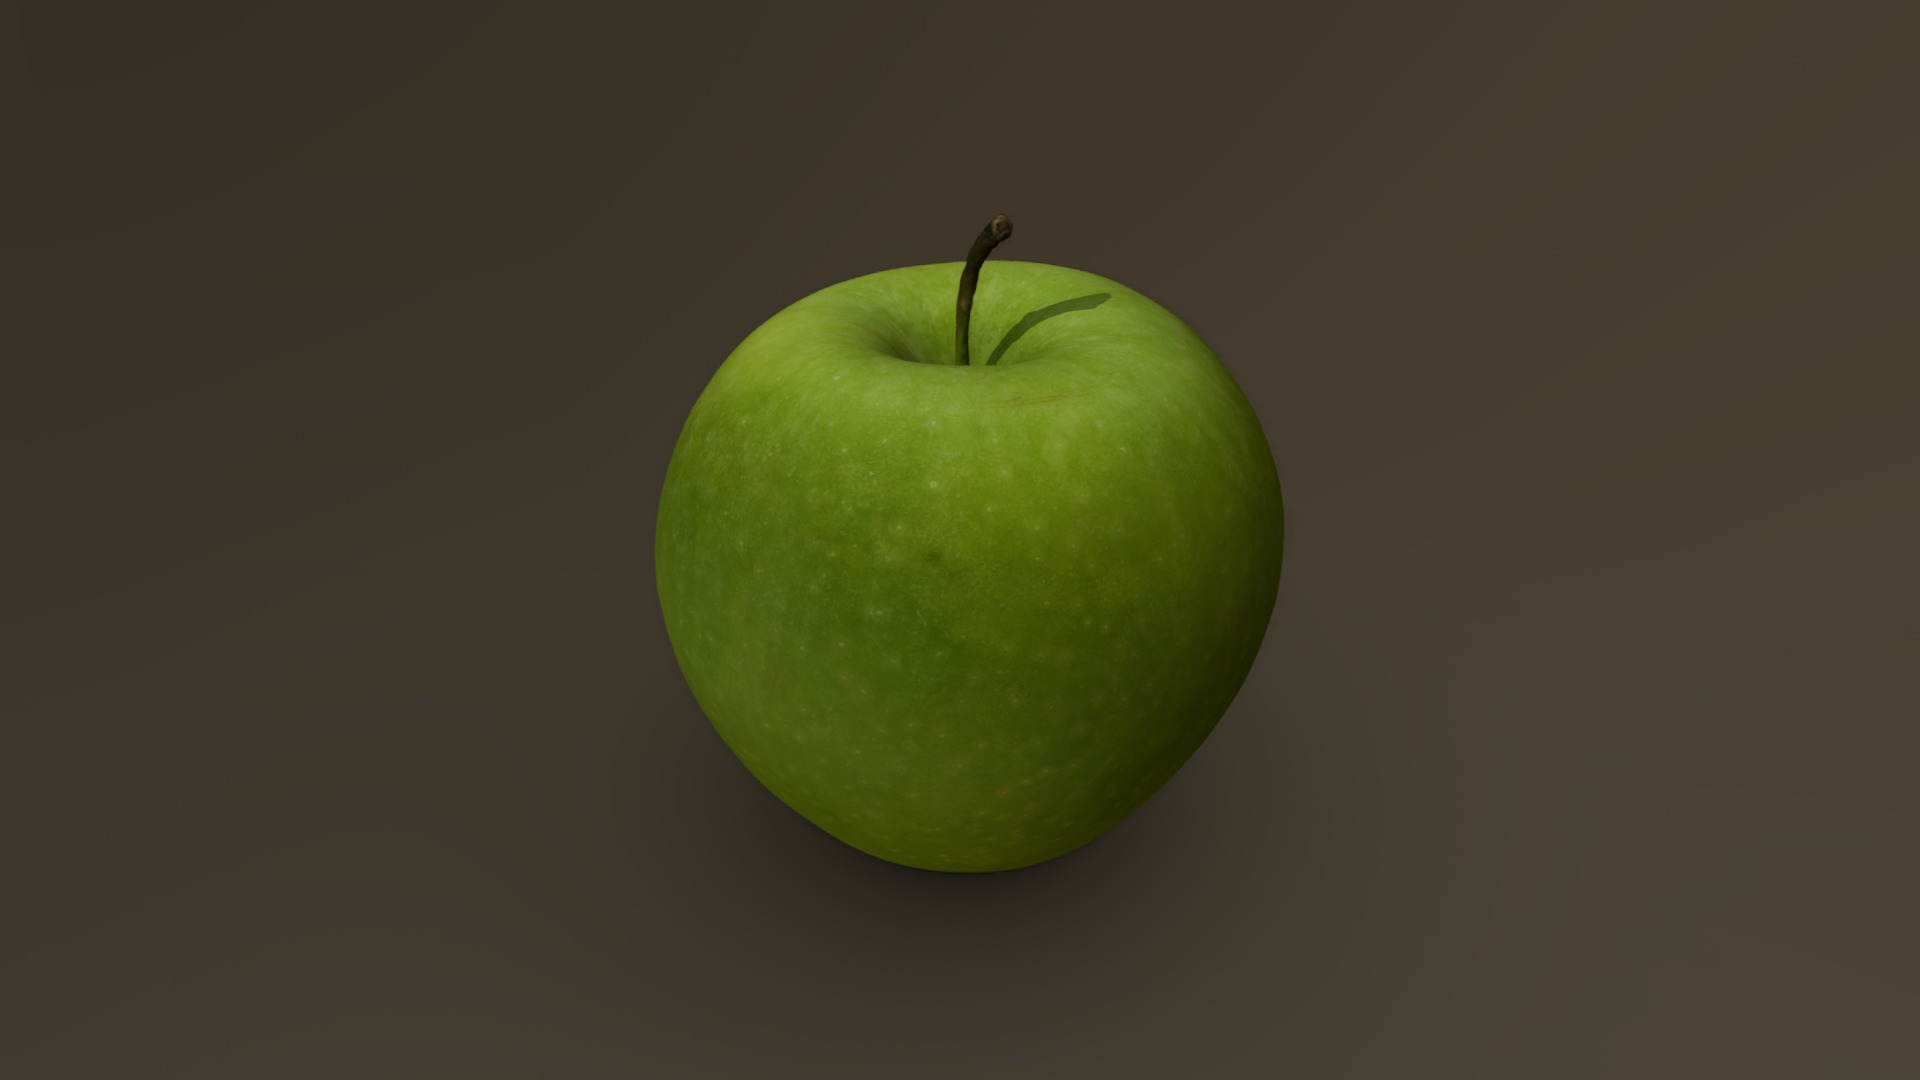 3D model Granny Smith Apple 01 - This is a 3D model of the Granny Smith Apple 01. The 3D model is about a green apple with a stem.